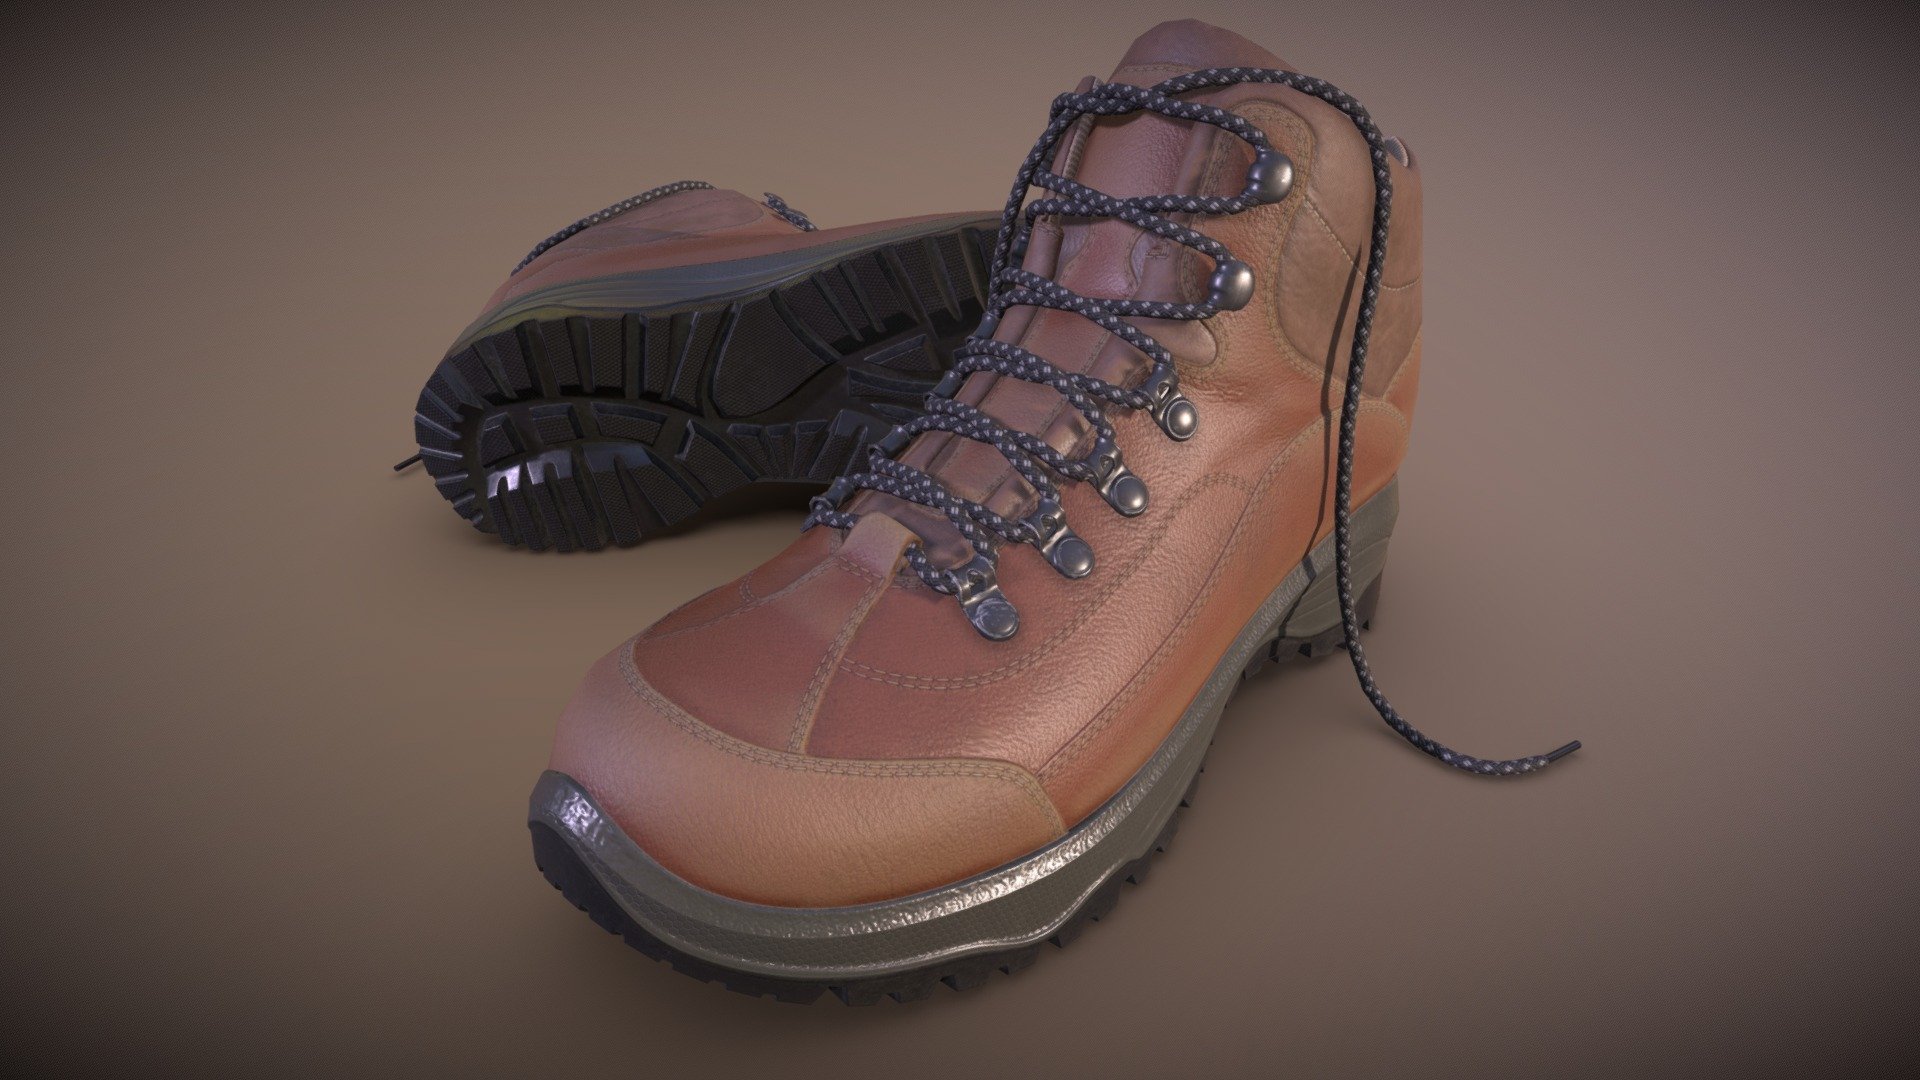 A model of leather boots. Design replicated from Scarpa Cyrus boots. 
Blender + Substance painter 3d model